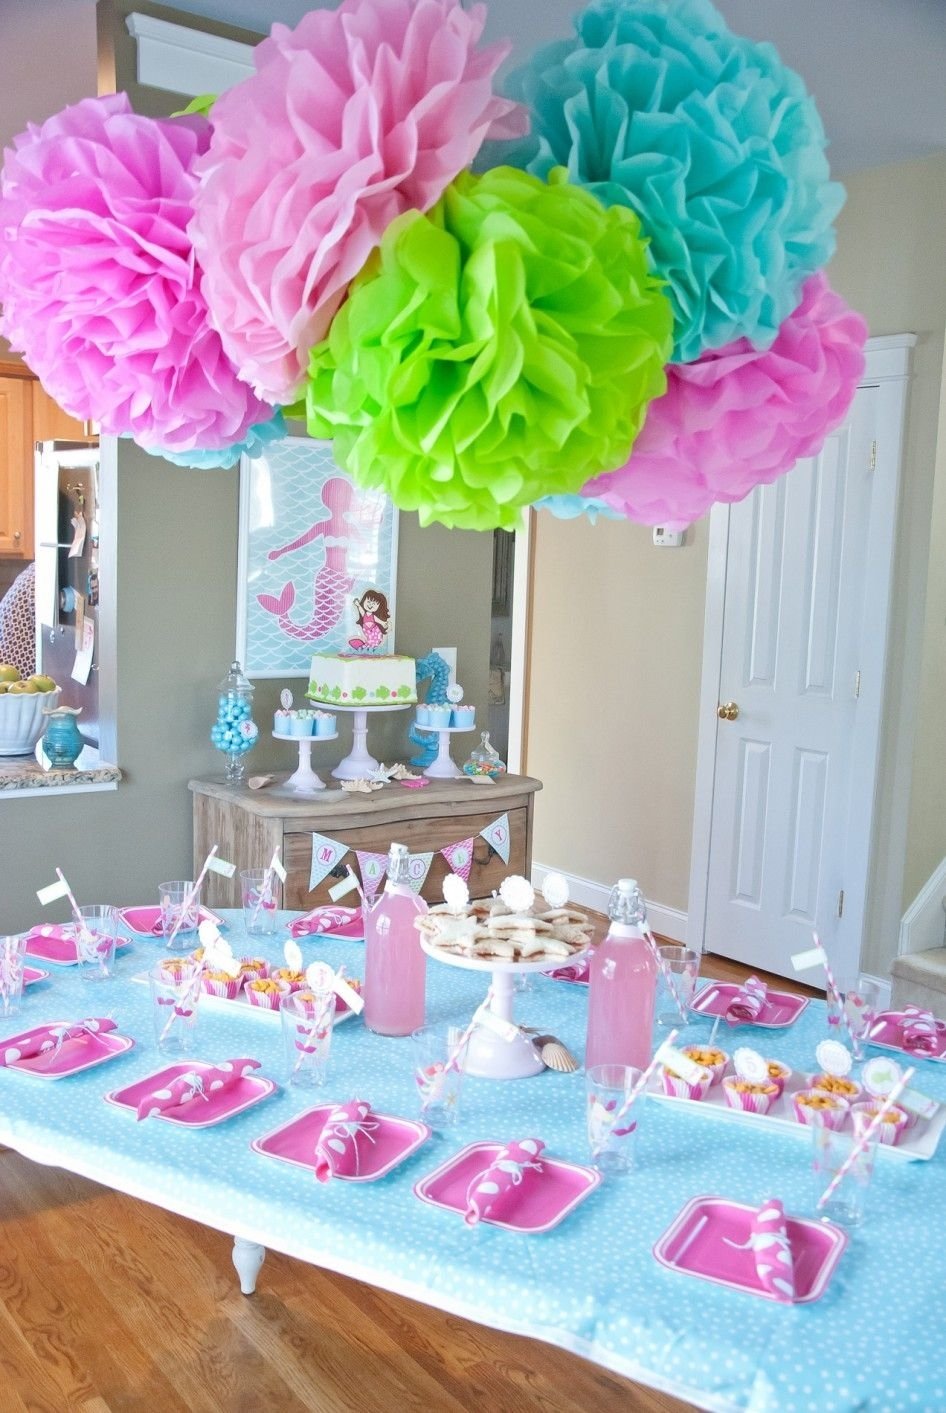 10 Ideal Birthday Party Centerpiece Ideas For Adults amusing birthday party table decoration ideas with birthday party 2 2022